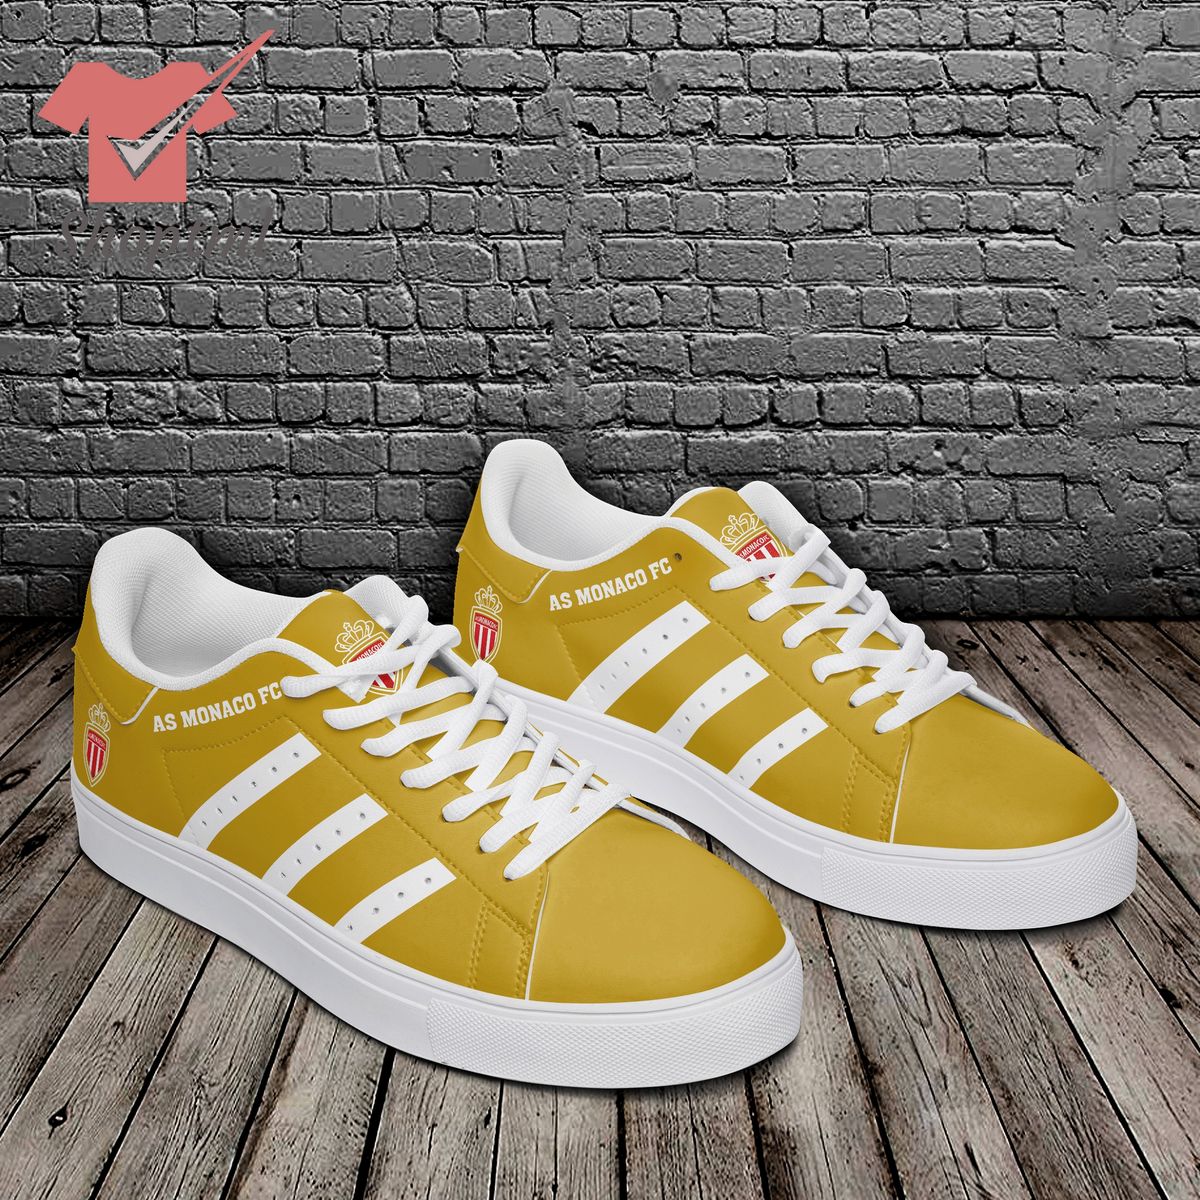 AS Monaco FC 3D Over Printed Stan Smith Shoes